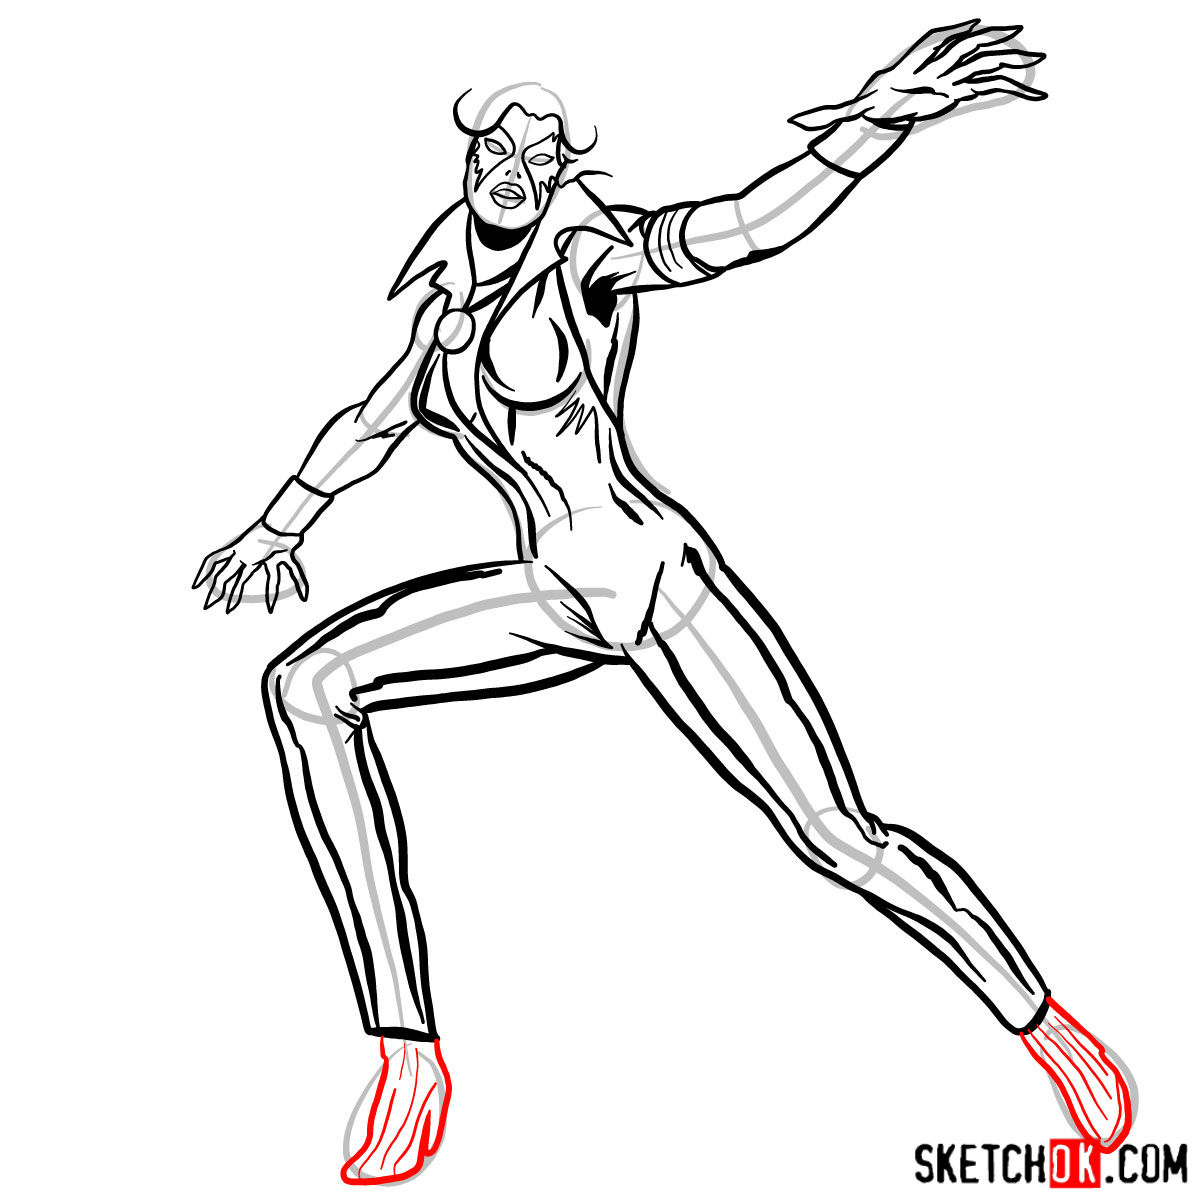 How to draw Dazzler the mutant from X-Men series - step 11